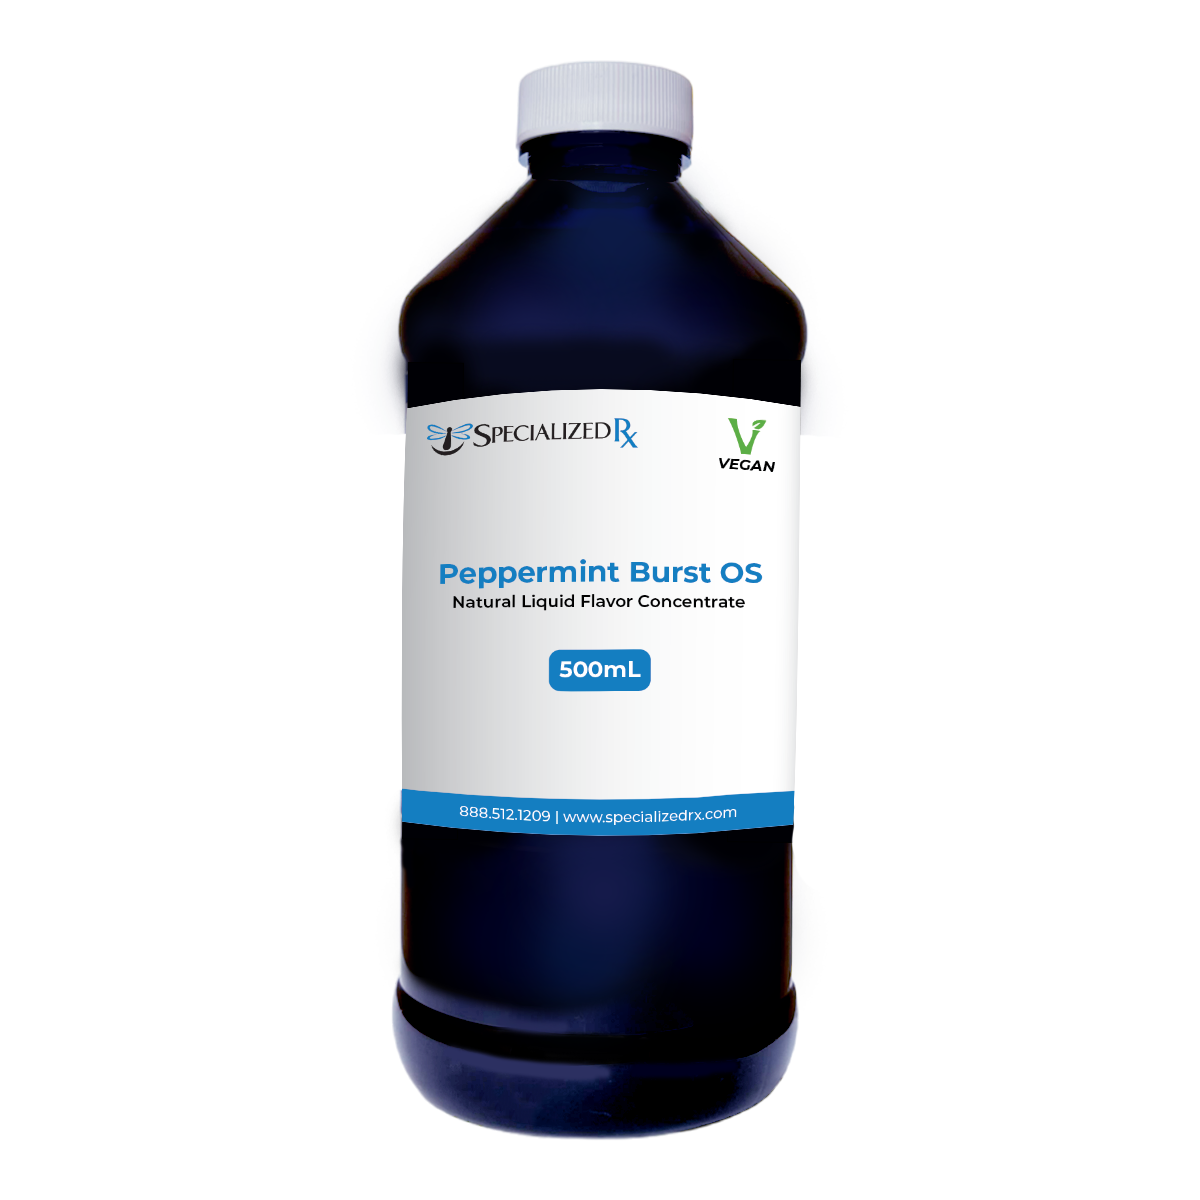 Peppermint Burst OS Natural Liquid Flavor Concentrate